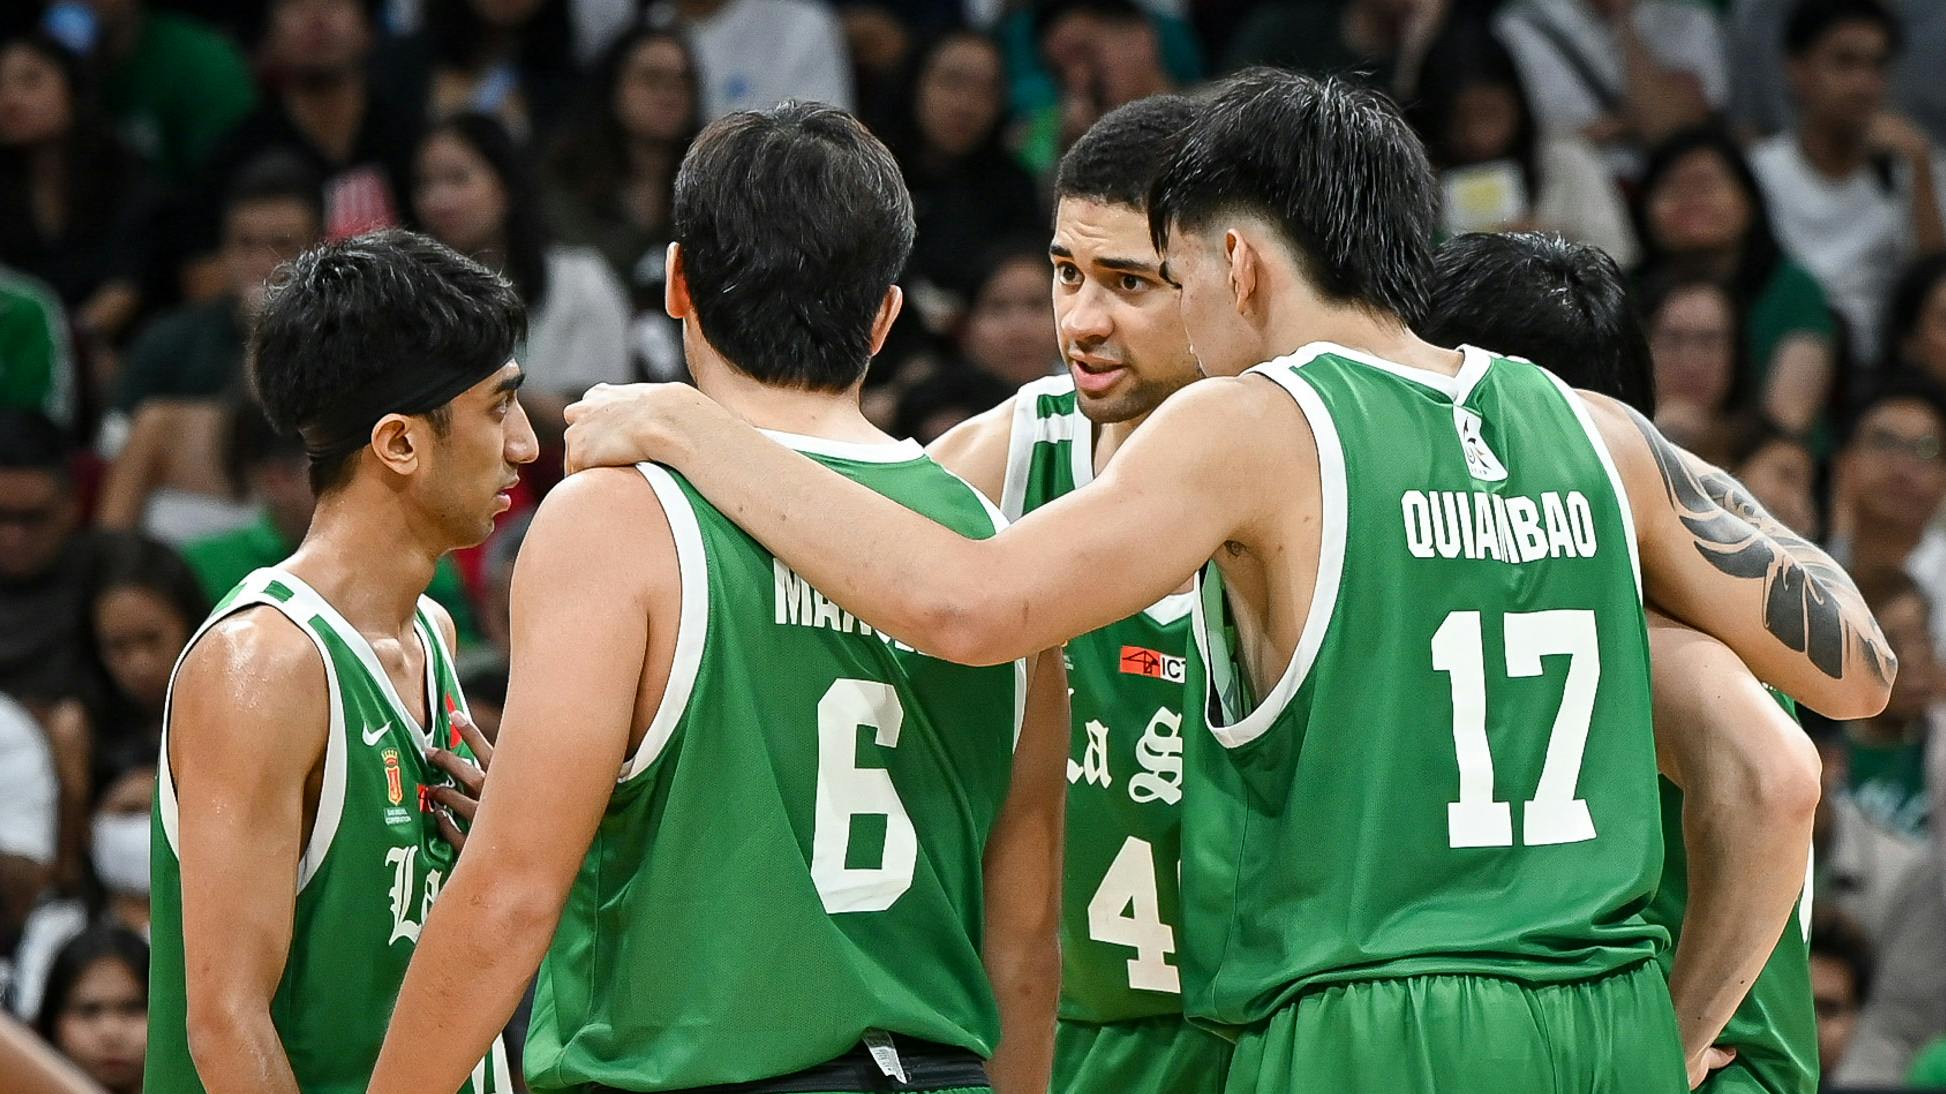 No excuses as La Salle hell-bent on bouncing back in win-or-go-home Game 2